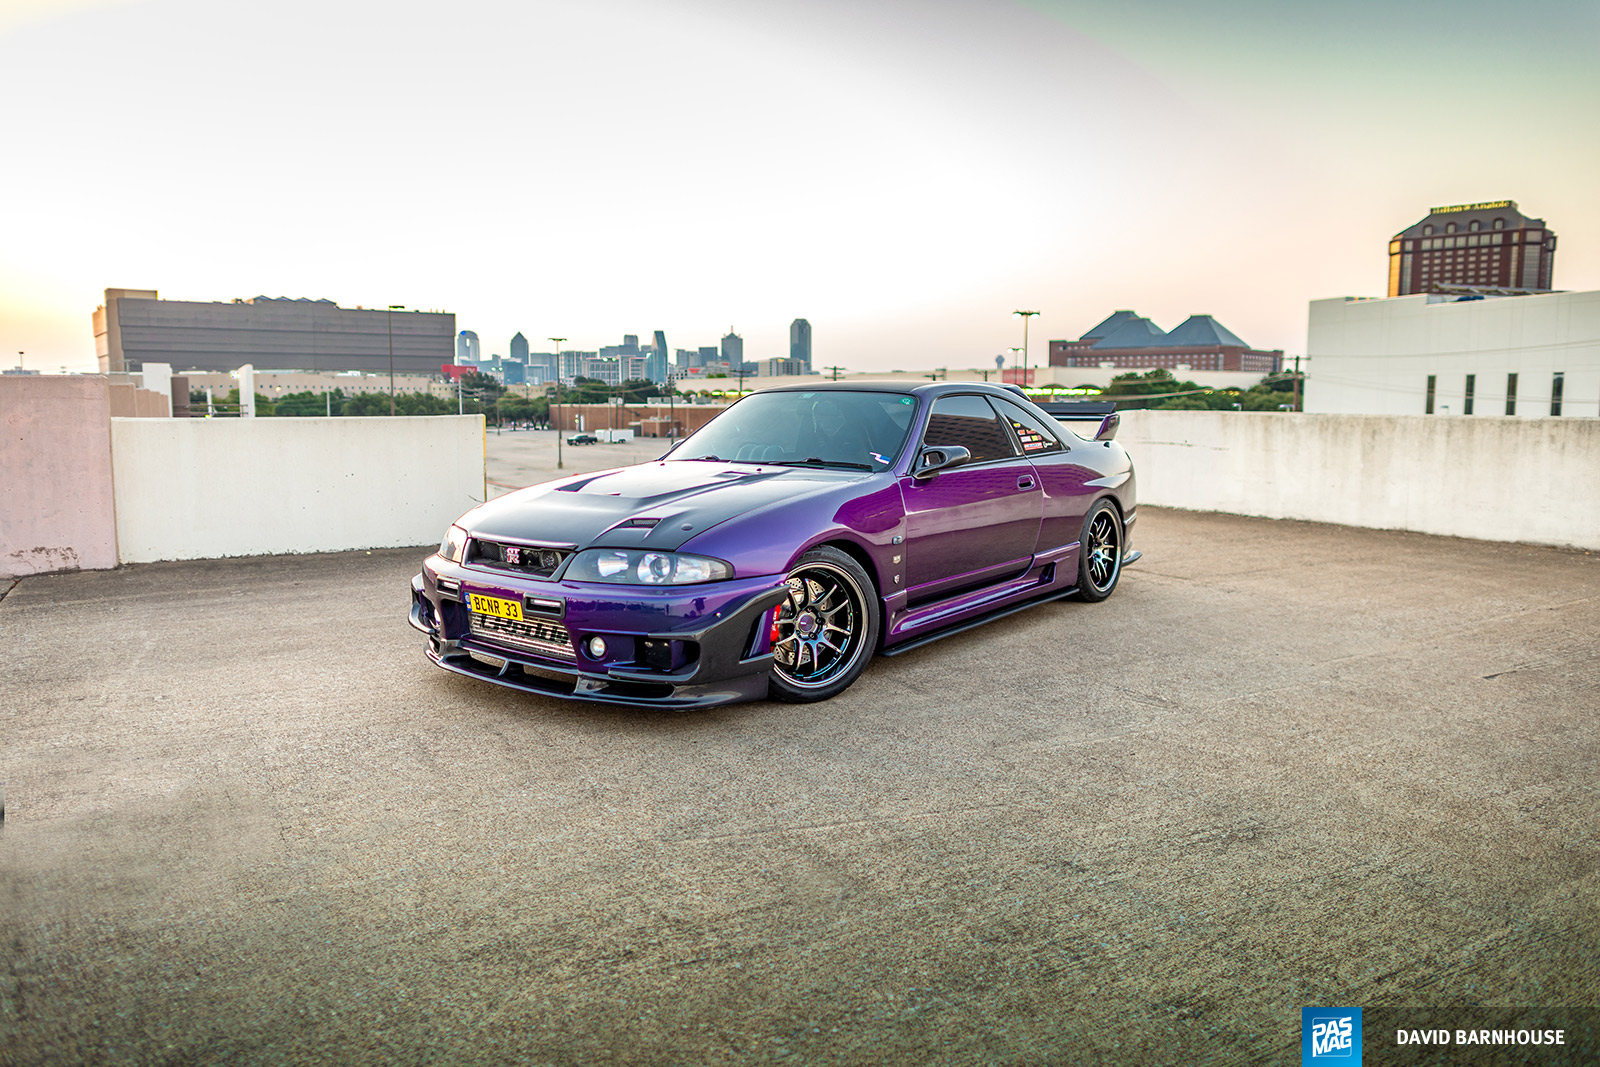 Battle Plan Eric Strickland S 1995 Nissan Skyline Gt R Pasmag Is The Tuner S Source For Modified Car Culture Since 1999